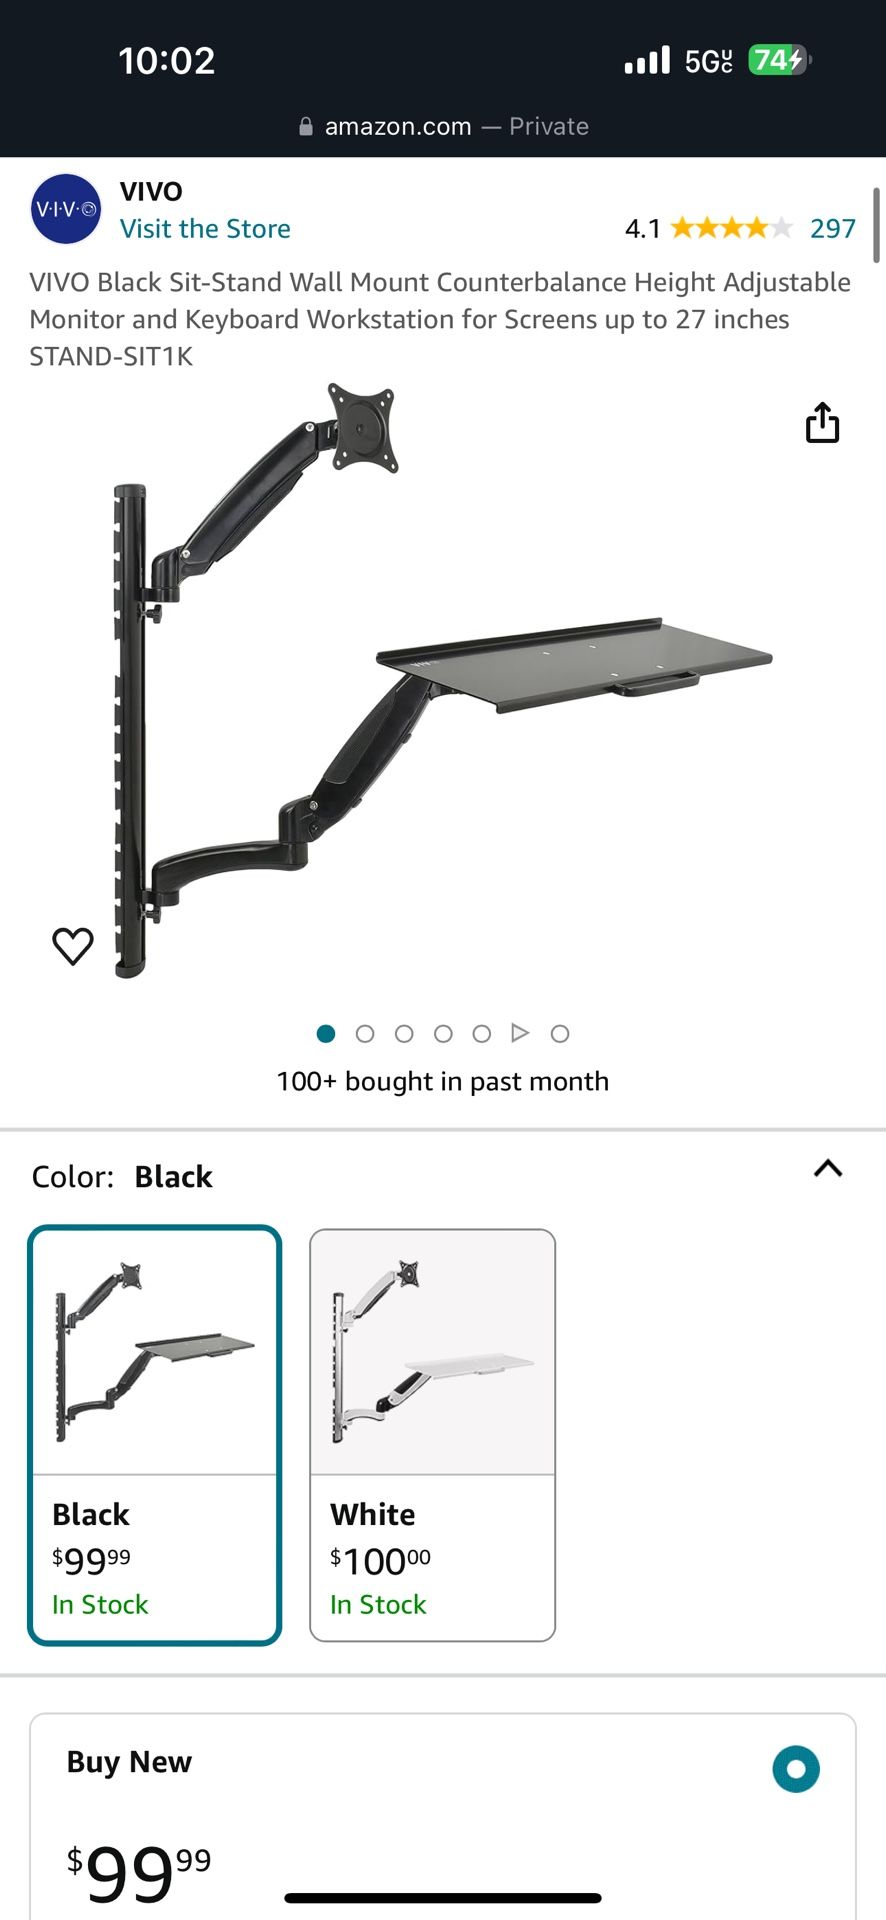 Black VIVO Sit Stand Monitor Wall Mount up to 27"